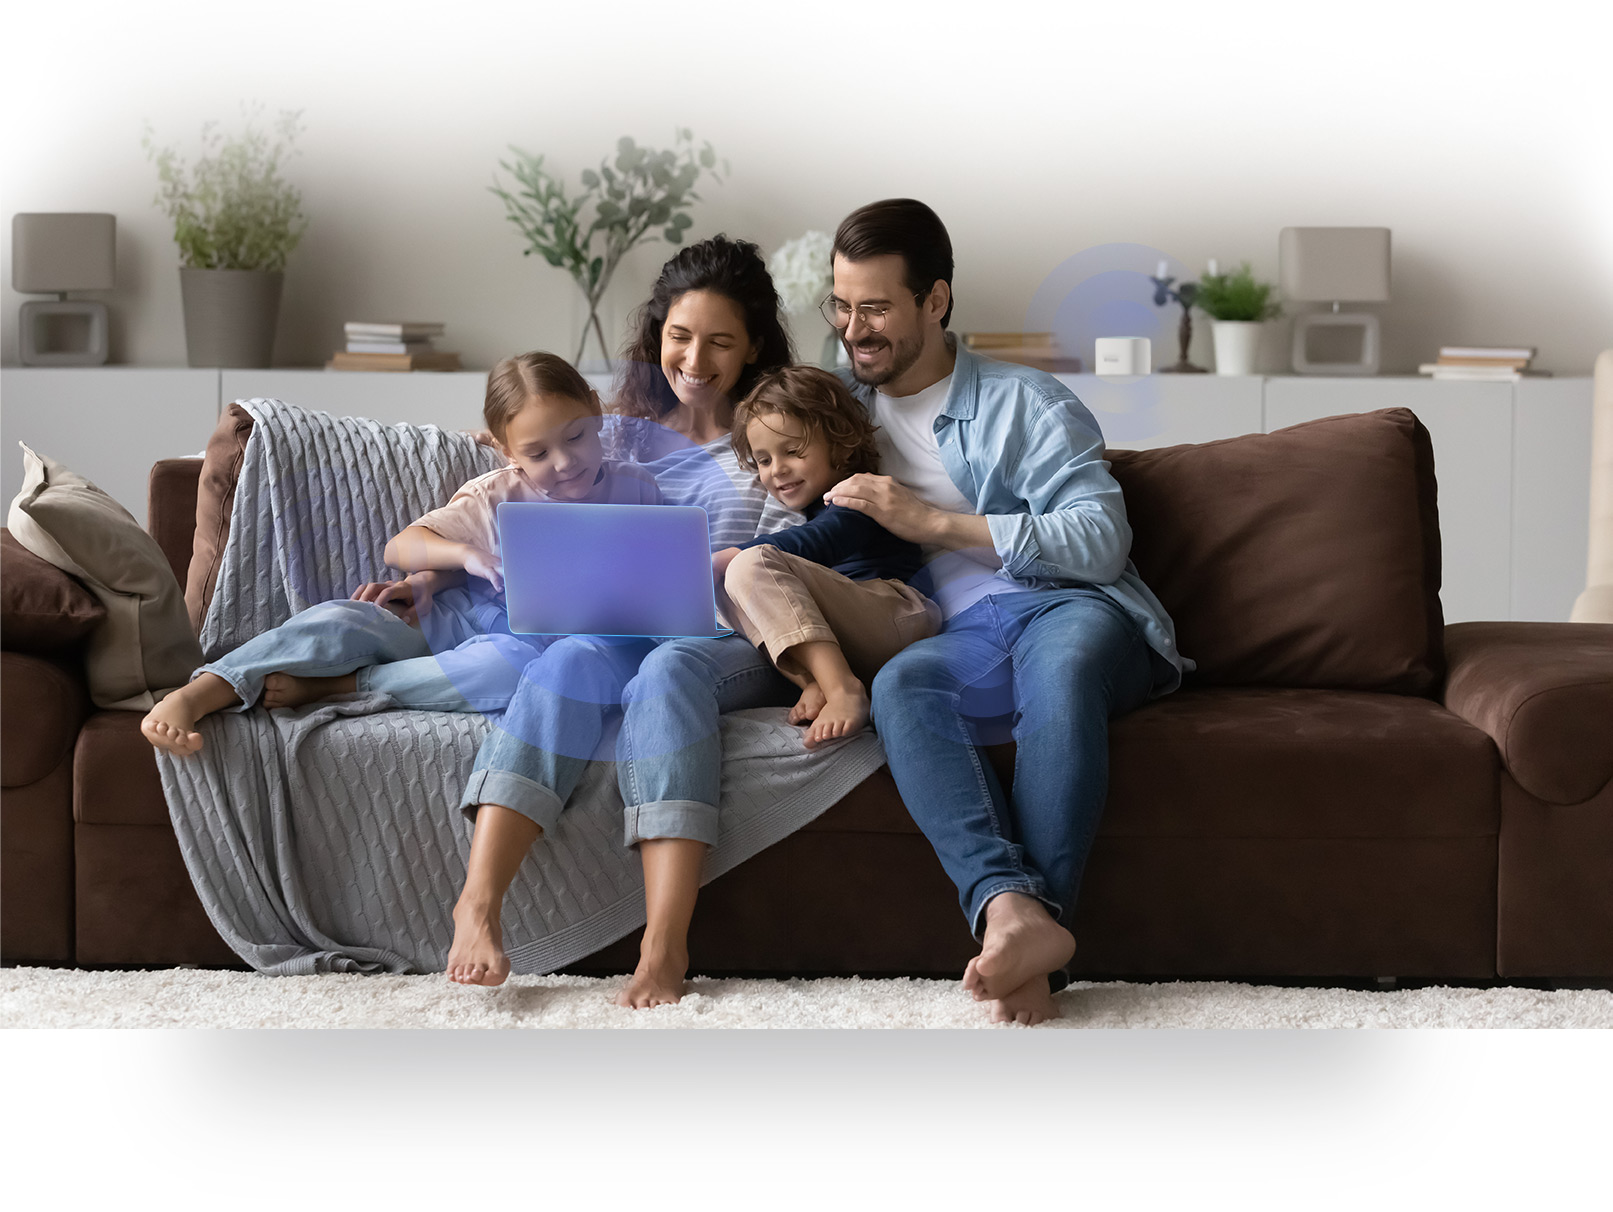 Family using devices and connected to a nearby M15 node.